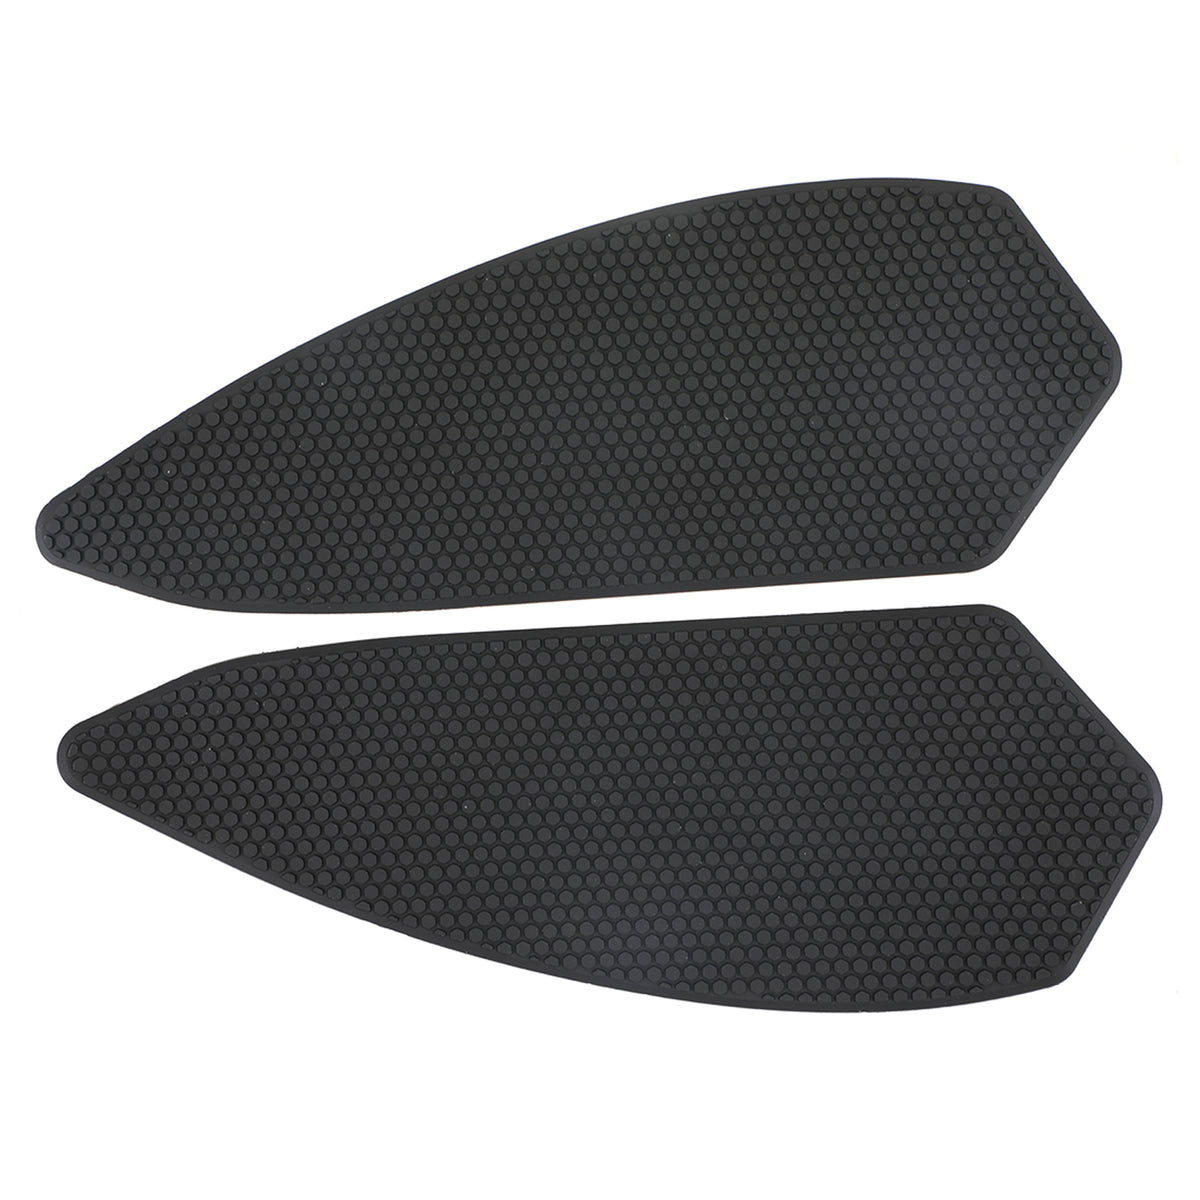 2020+ BMW S1000RR Tank Side Pads Traction Grips Black